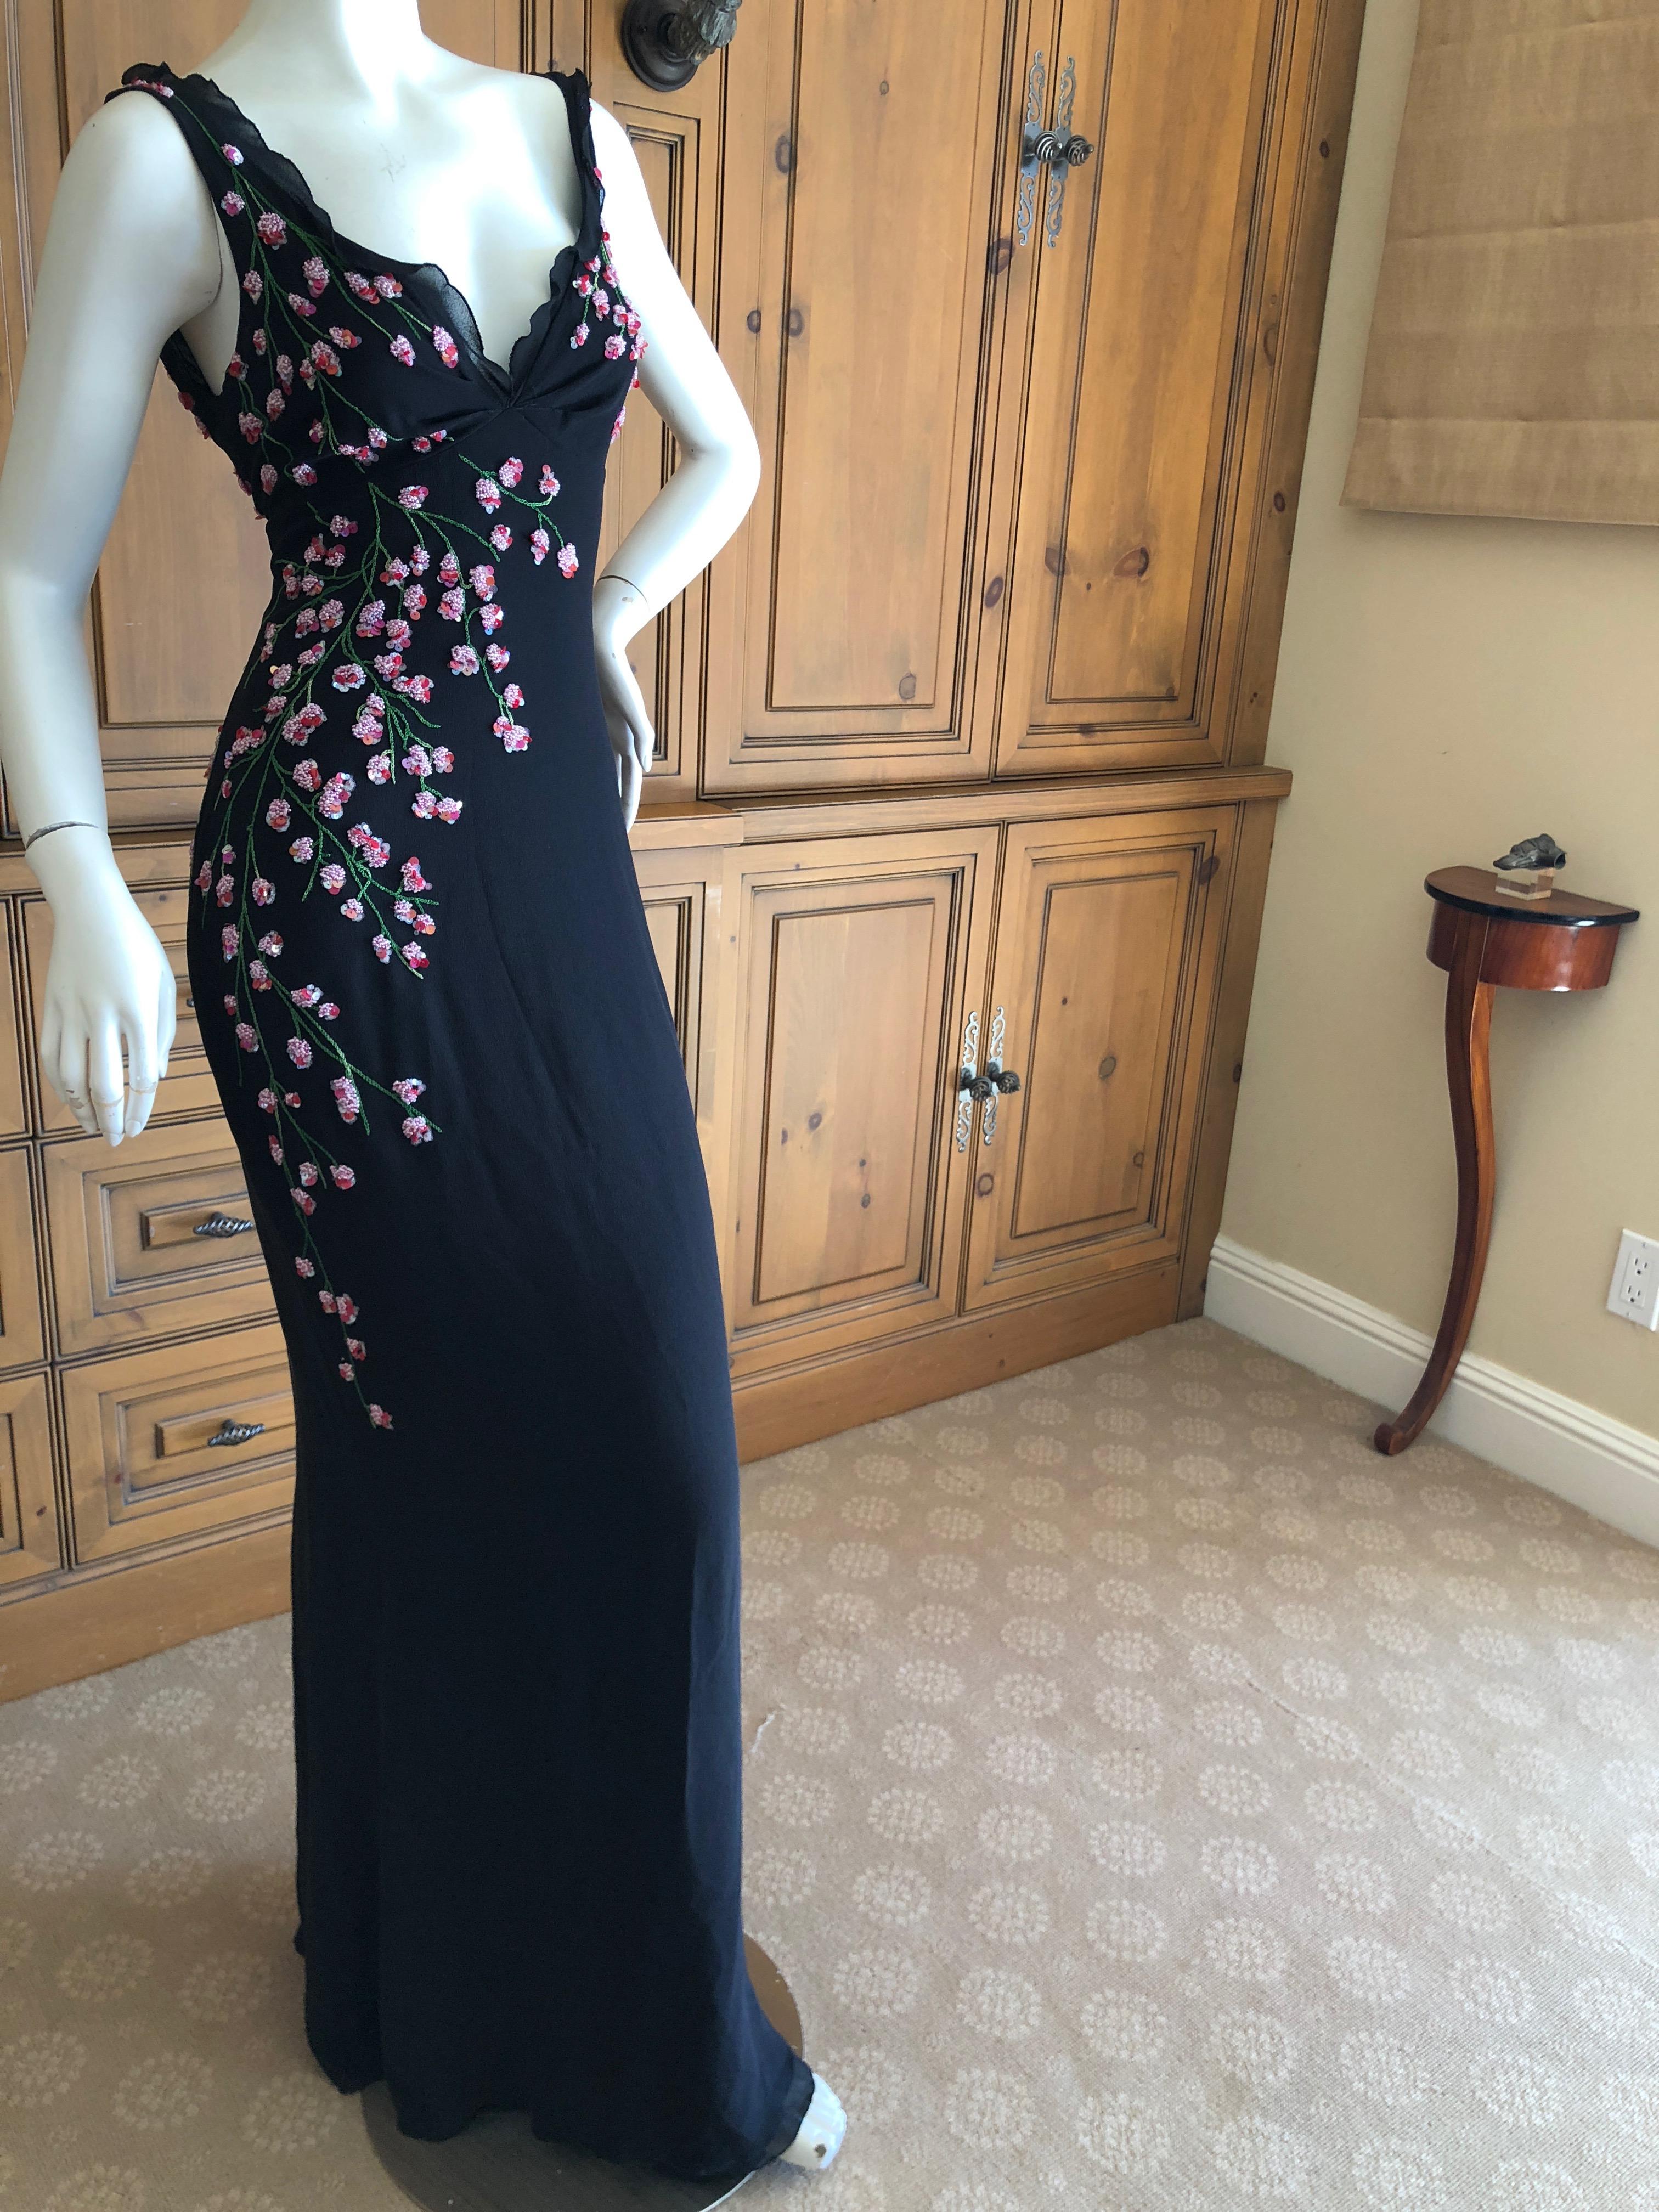 Emanuel Ungaro Romantic Vintage Silk Evening Dress with Floral Beading  In Excellent Condition For Sale In Cloverdale, CA